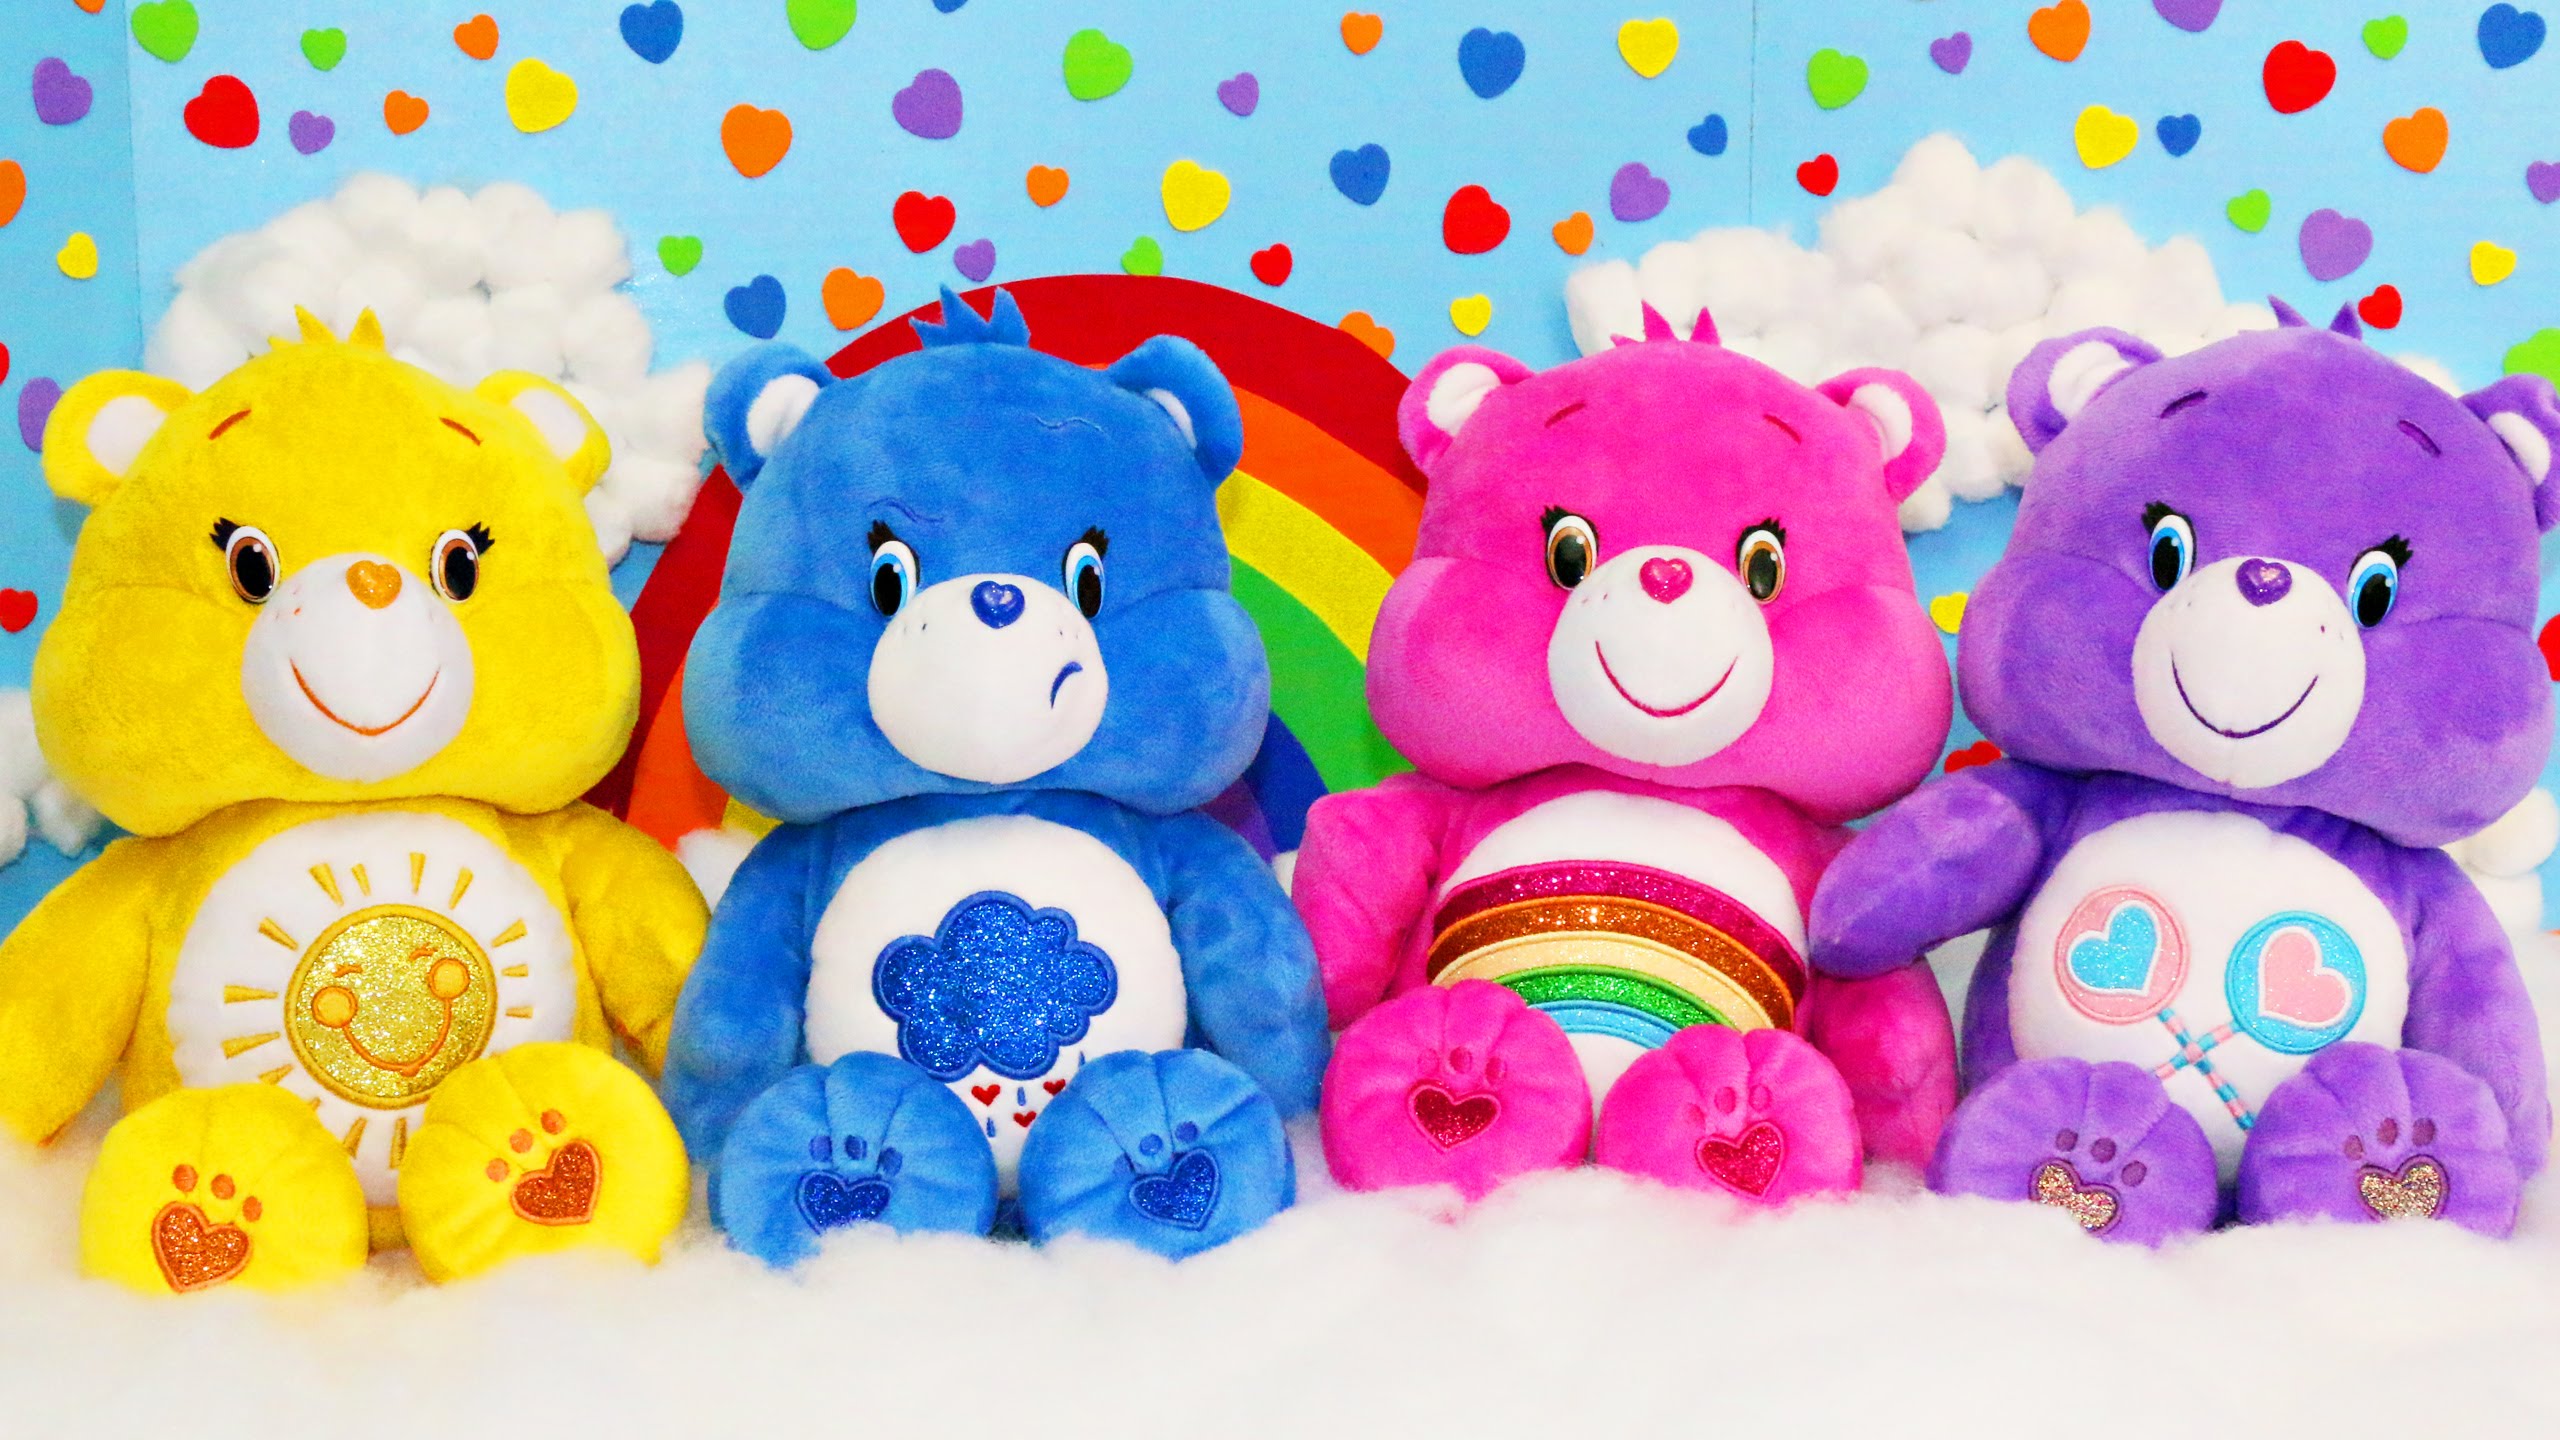 Care Bears wallpapers, Cartoon, HQ Care Bears pictures 4K Wallpapers 2019